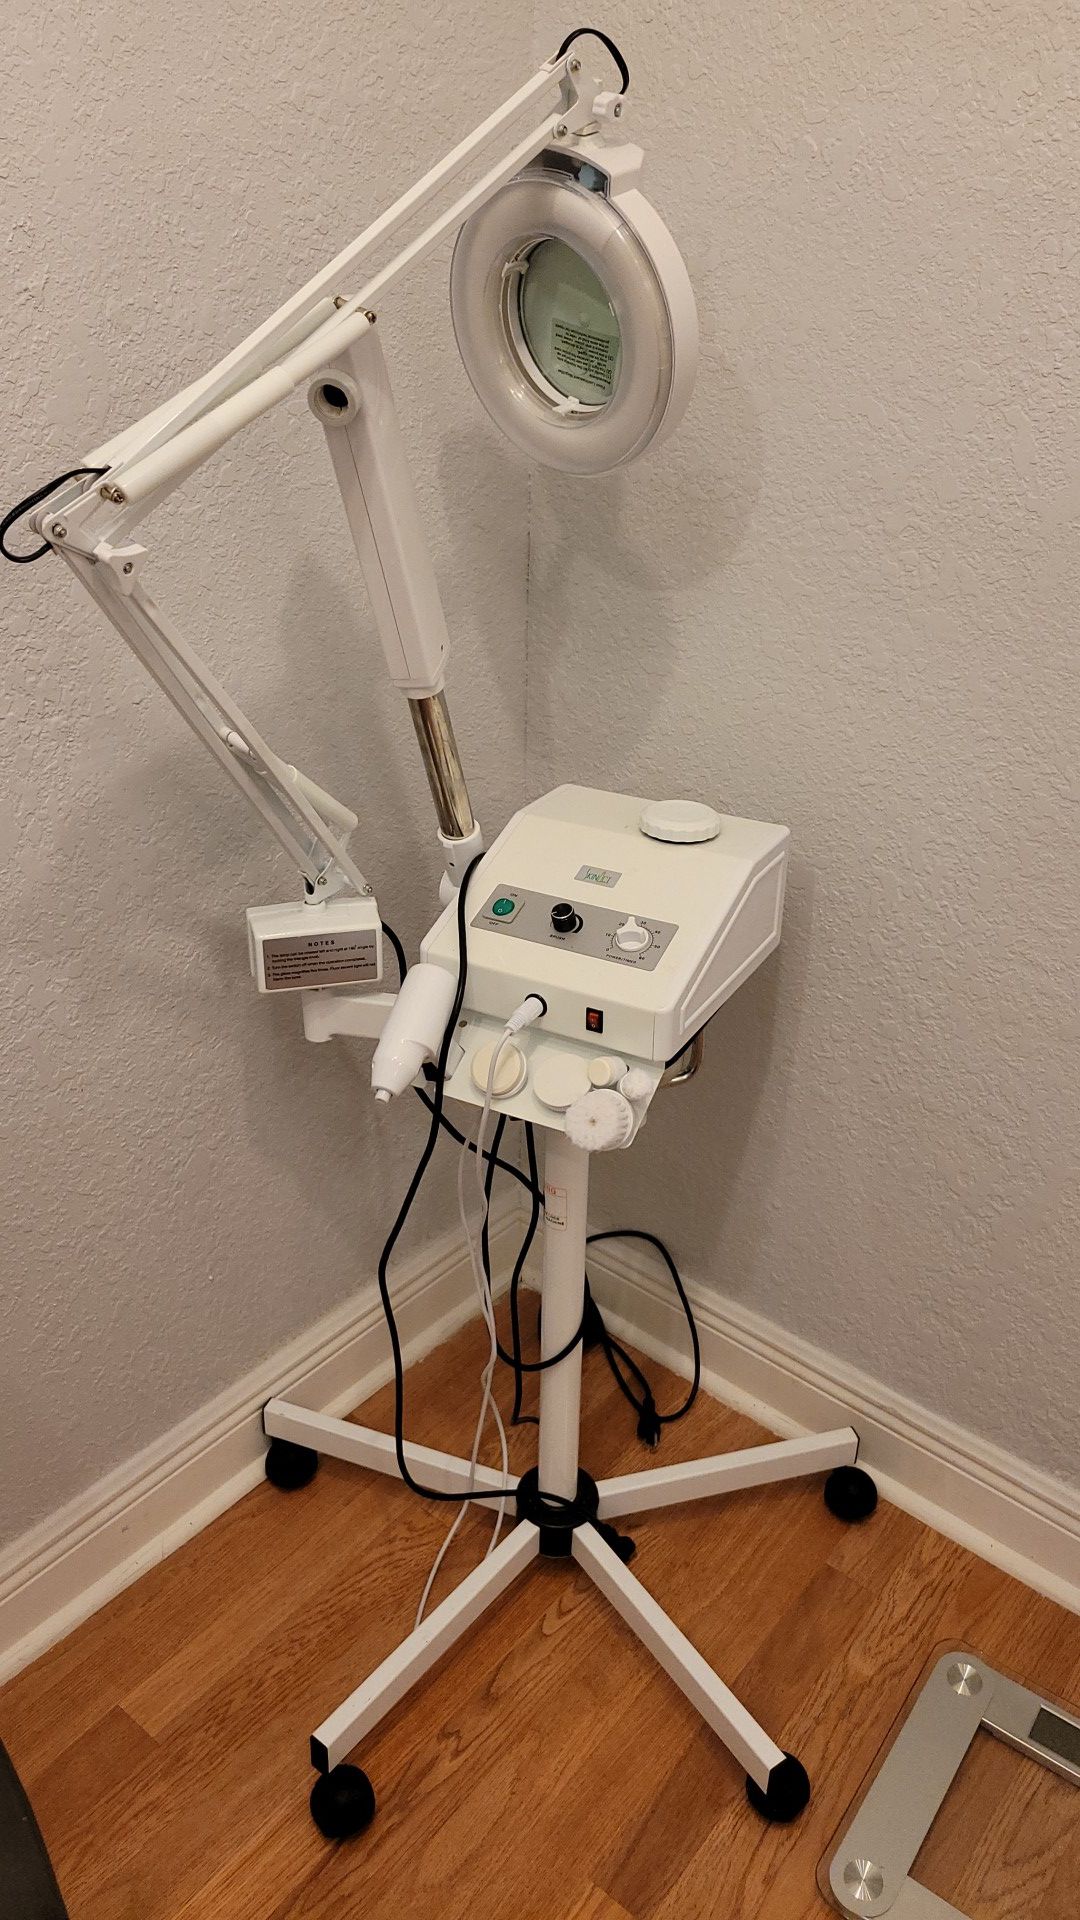 Facial steamer with magnifying lamp and cleaning tools